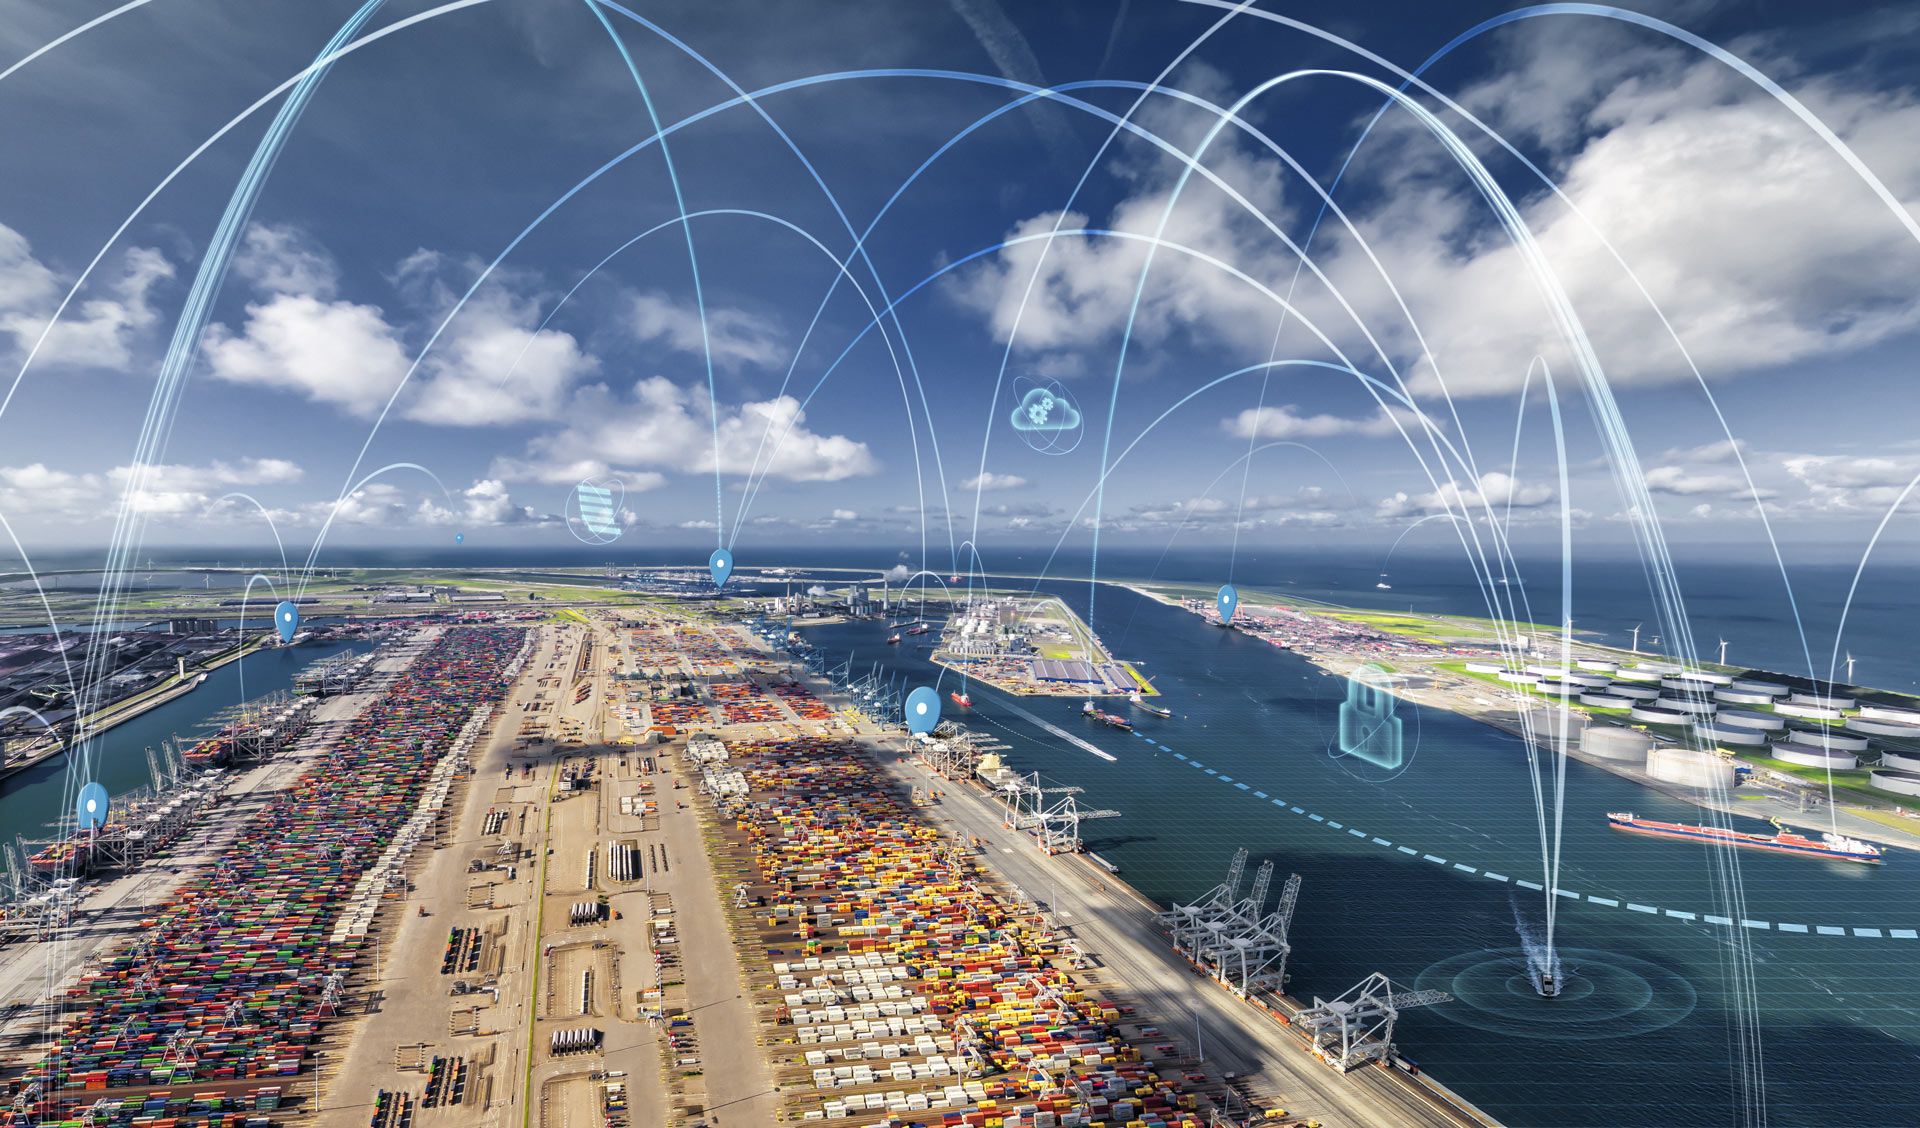 Port of Rotterdam on course for self-driving ships by 2030 - Smart Cities World